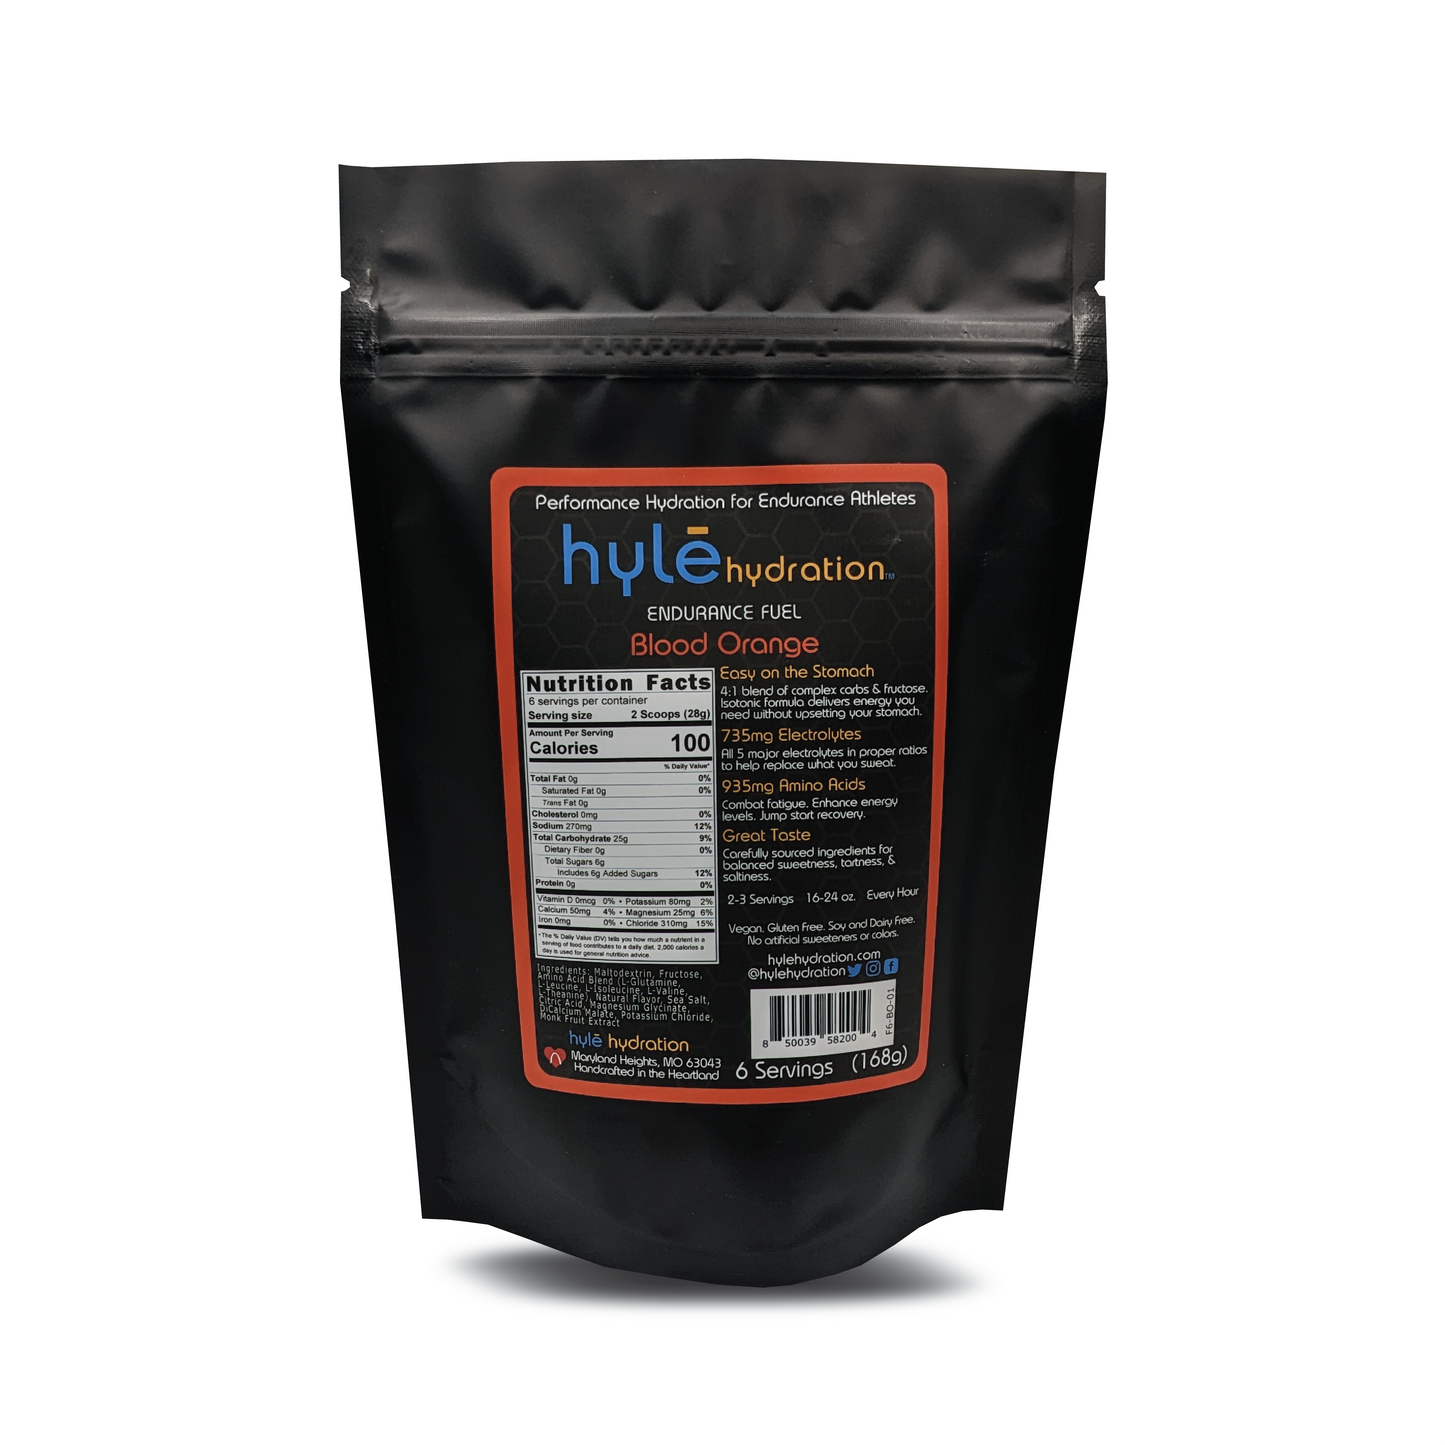 Hyle Hydration Endurance Fuel 6 serving bag Blood Orange flavor. Hyle Hydration Endurance Fuel is a powdered sports drink mix with carbohydrates, electrolytes, and amino acids.